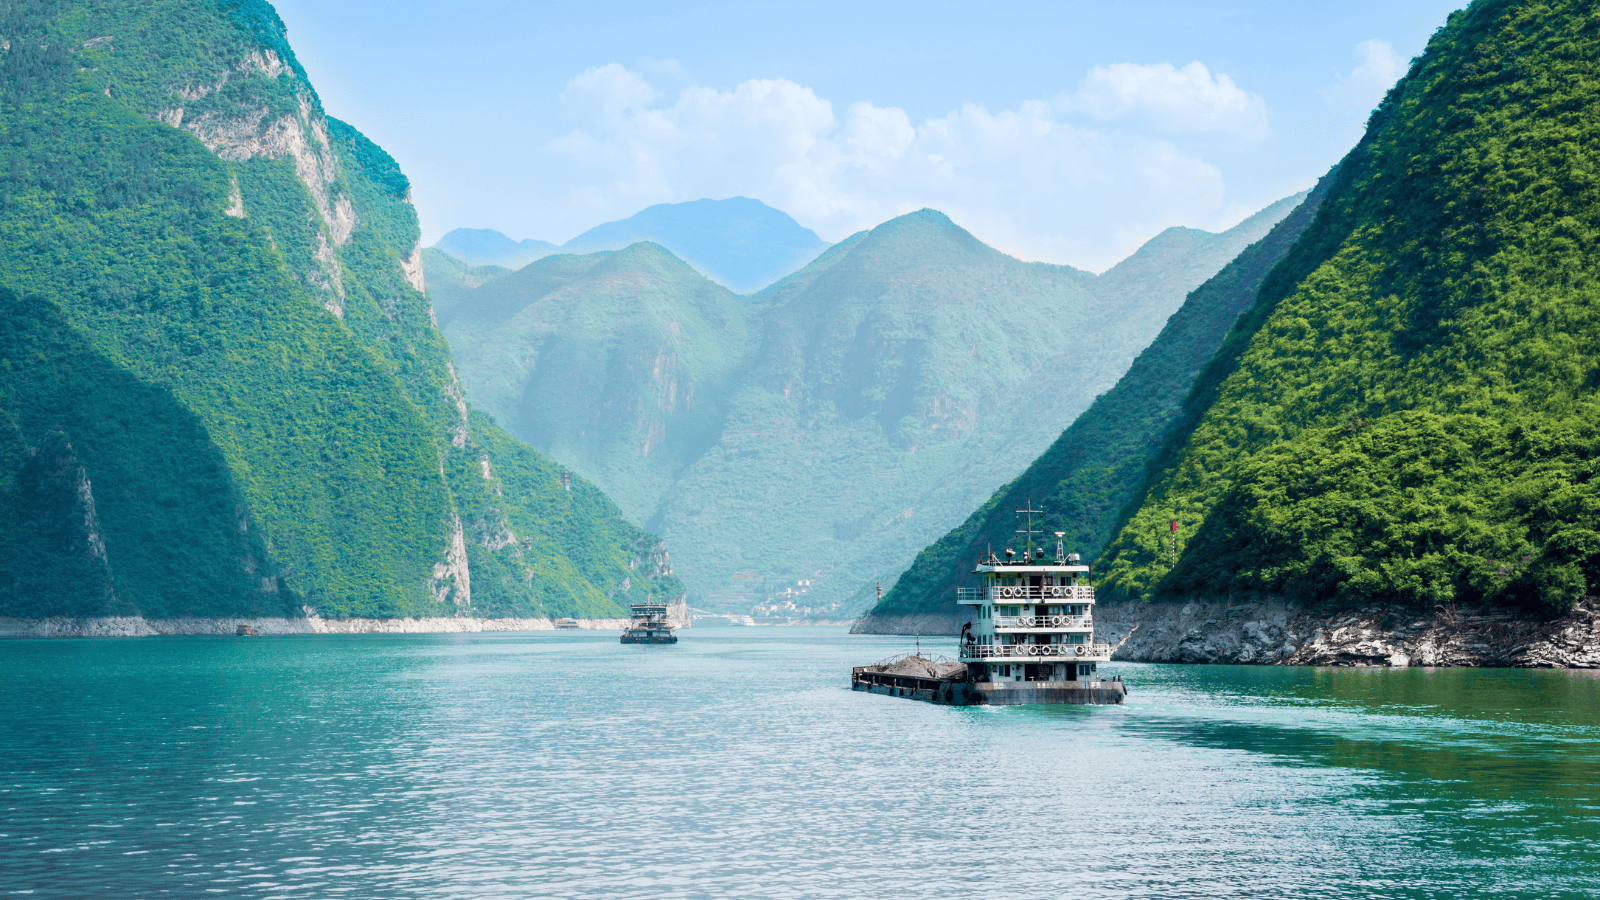 <p>For a 5-star river cruise experience, you can’t go wrong with the <a href="https://www.yangtze-river-cruises.com/ships/yangtze-explorer.html" rel="nofollow external noopener noreferrer">Yangtze Explorer</a>. The ship is managed by Yangtze River Cruises, which offers three- or four-night tours of this stunning river in Central China. Your time on the Yangtze Explorer will be equally thrilling and relaxing.</p><p>Each cabin features a balcony to admire the dramatic landscapes, and guests can participate in enriching activities like Chinese calligraphy and cooking classes. You can choose from several Yangtze Explorer itineraries featuring UNESCO World Heritage Sites, mountains, caves, and more.</p>